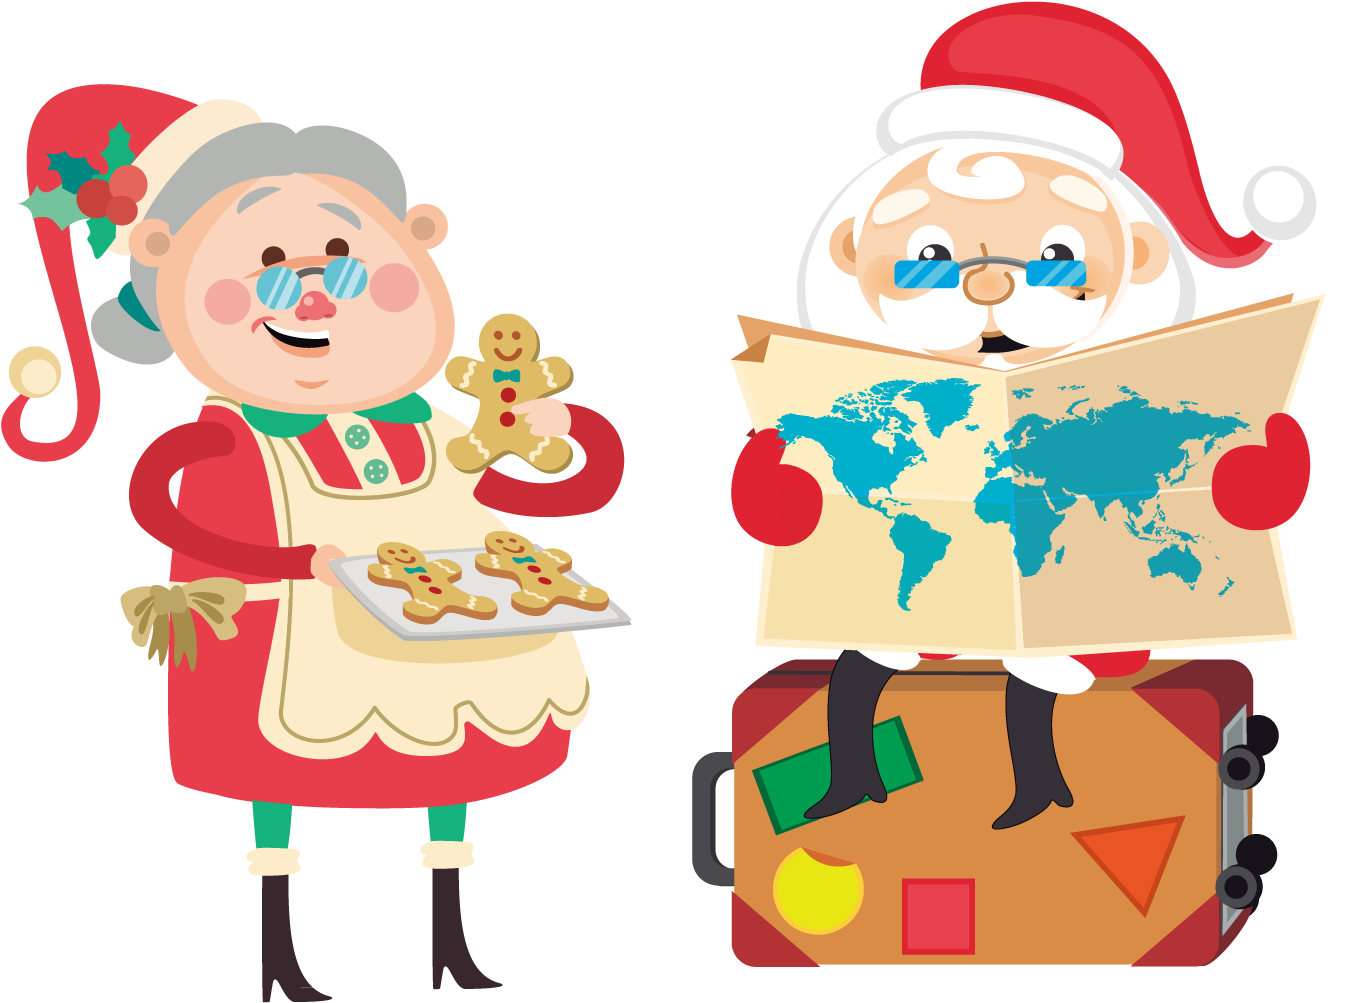 Claus Map Scalable Vector Graphics - Santa Claus Map Scalable Vector ...